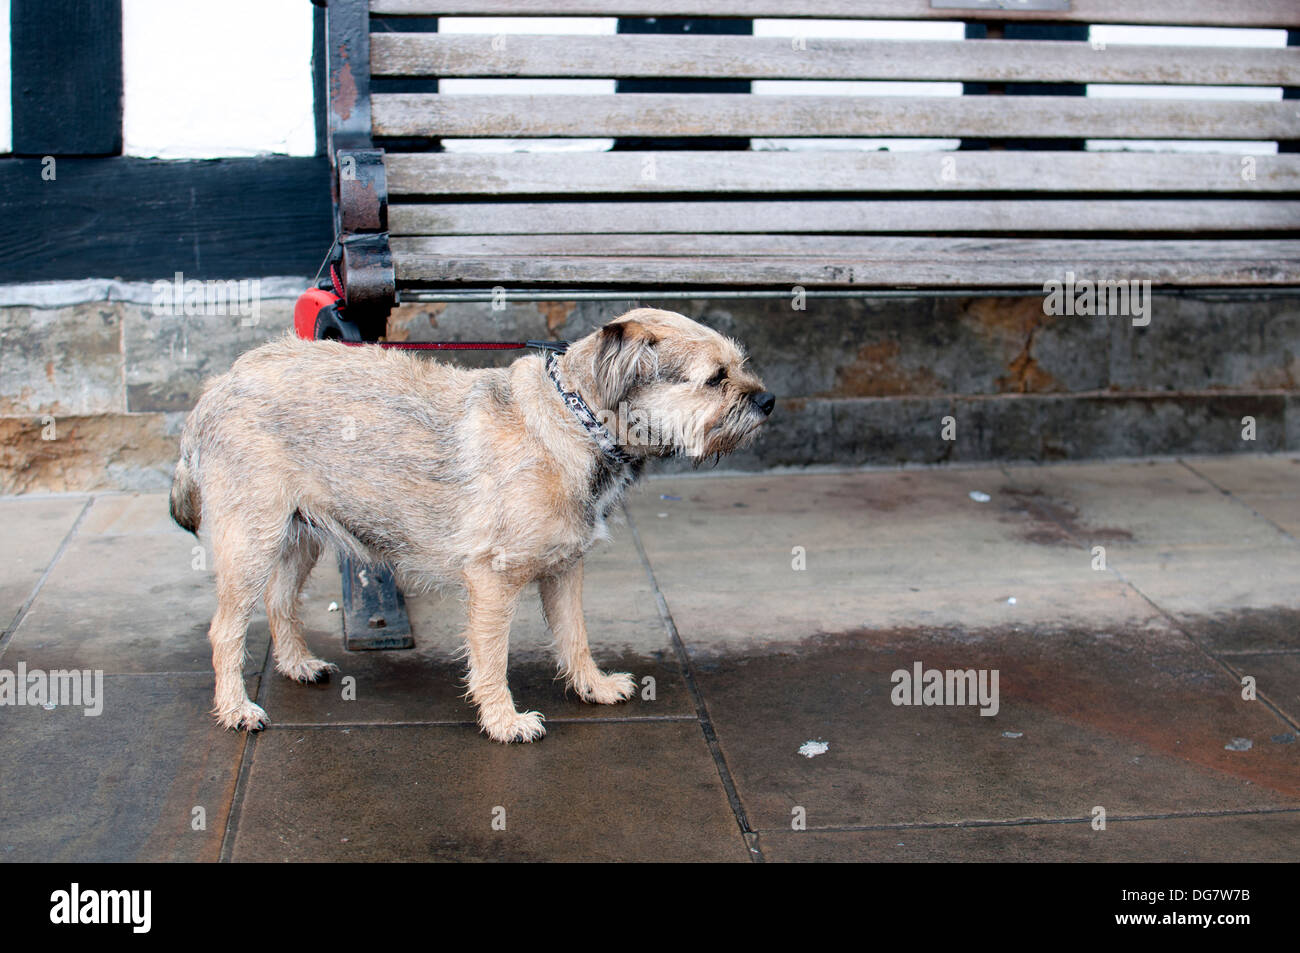 Dog tied up outside public library Stock Photo